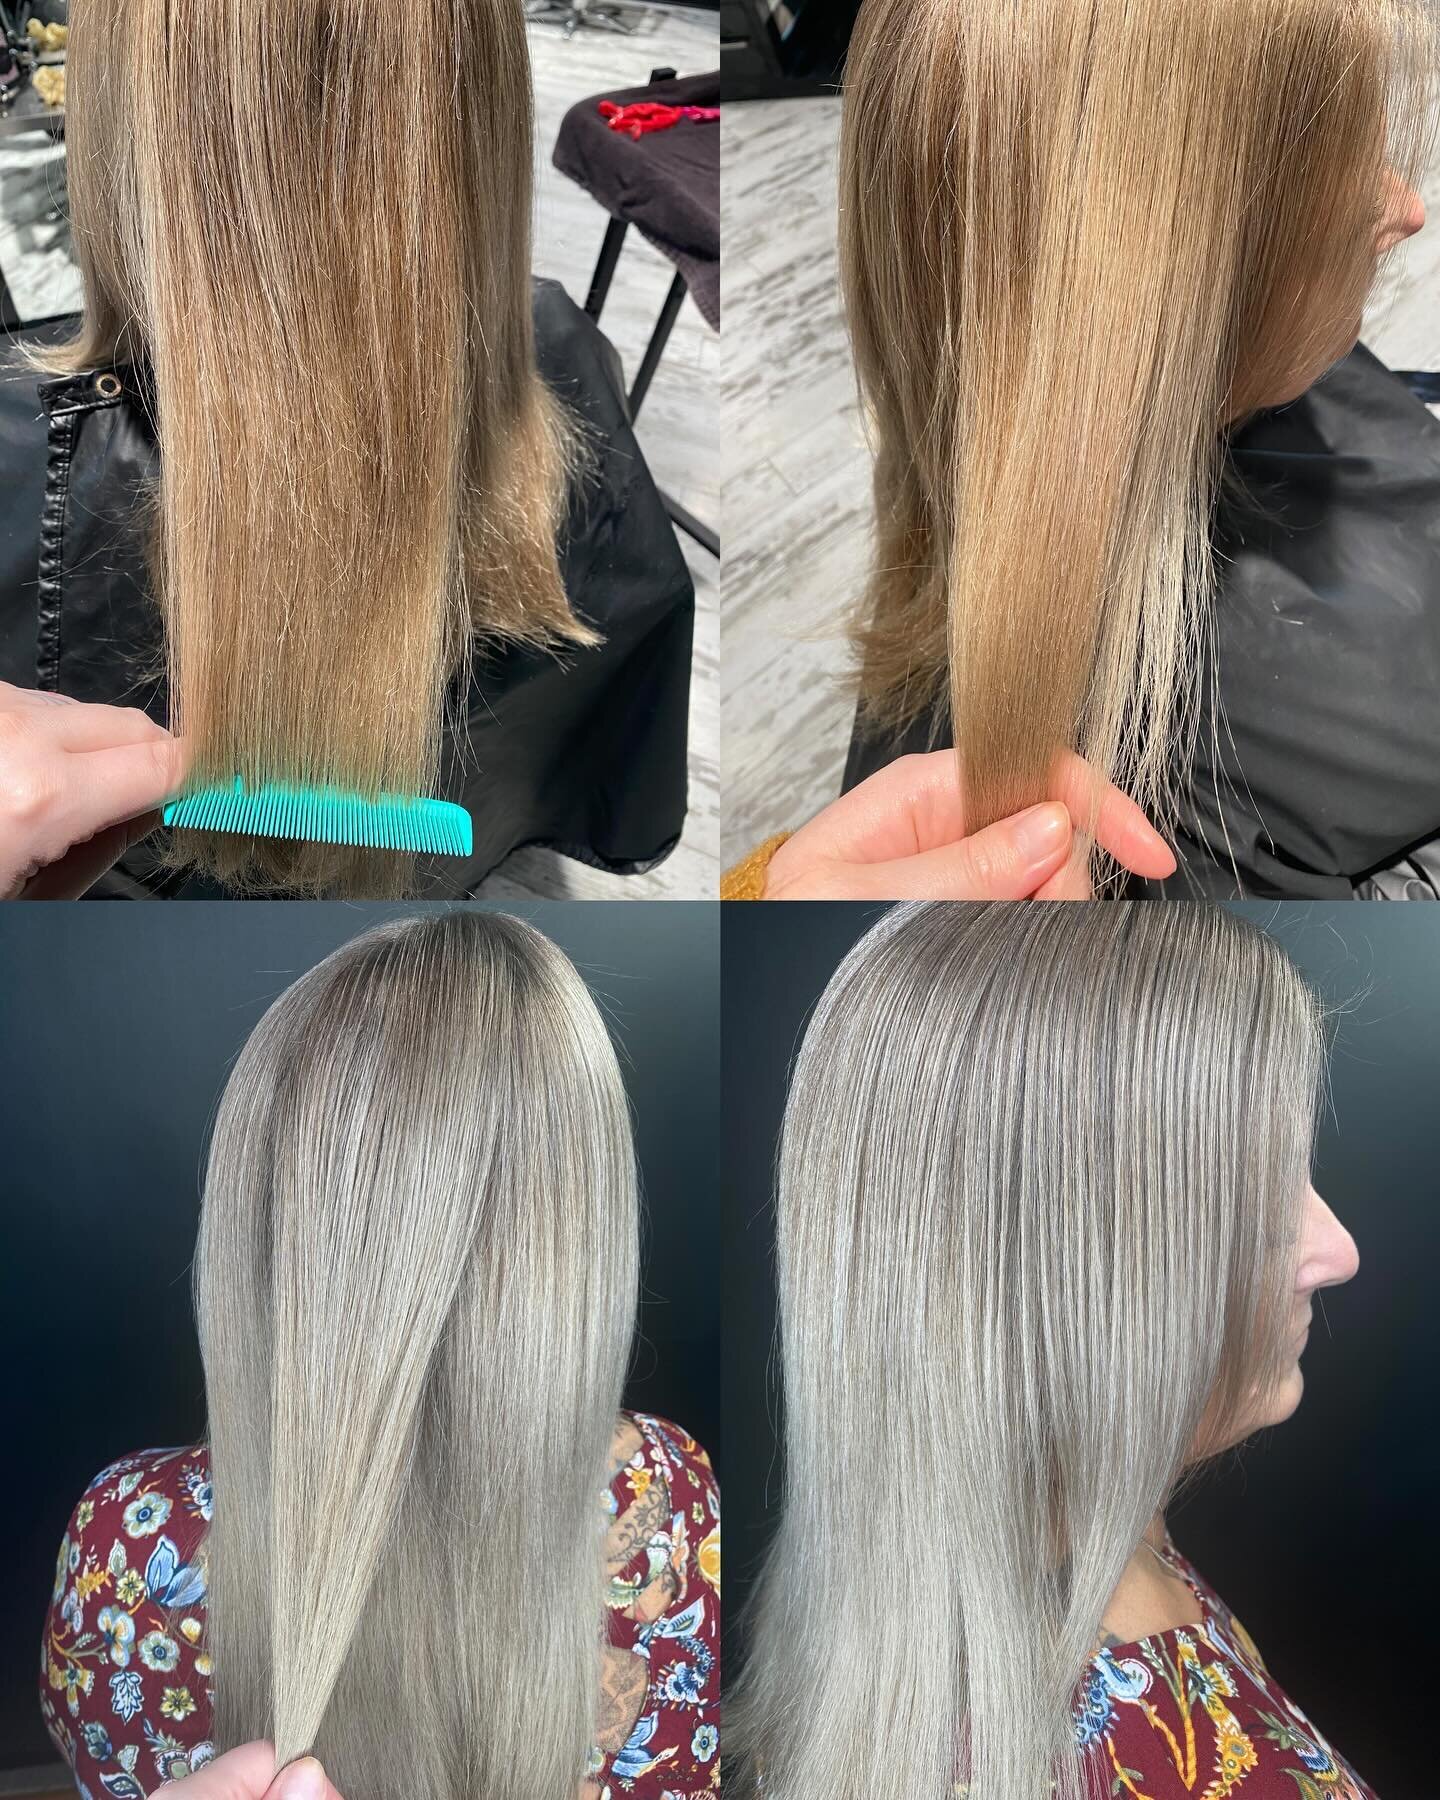 Gloss refresh 🫶🏻
With shades eq gloss canceling unwanted warmth giving her cool results every 4-6 weeks! 
.
.
.
#shadeseq 
#shadeseqgloss
#beforeandafterhair